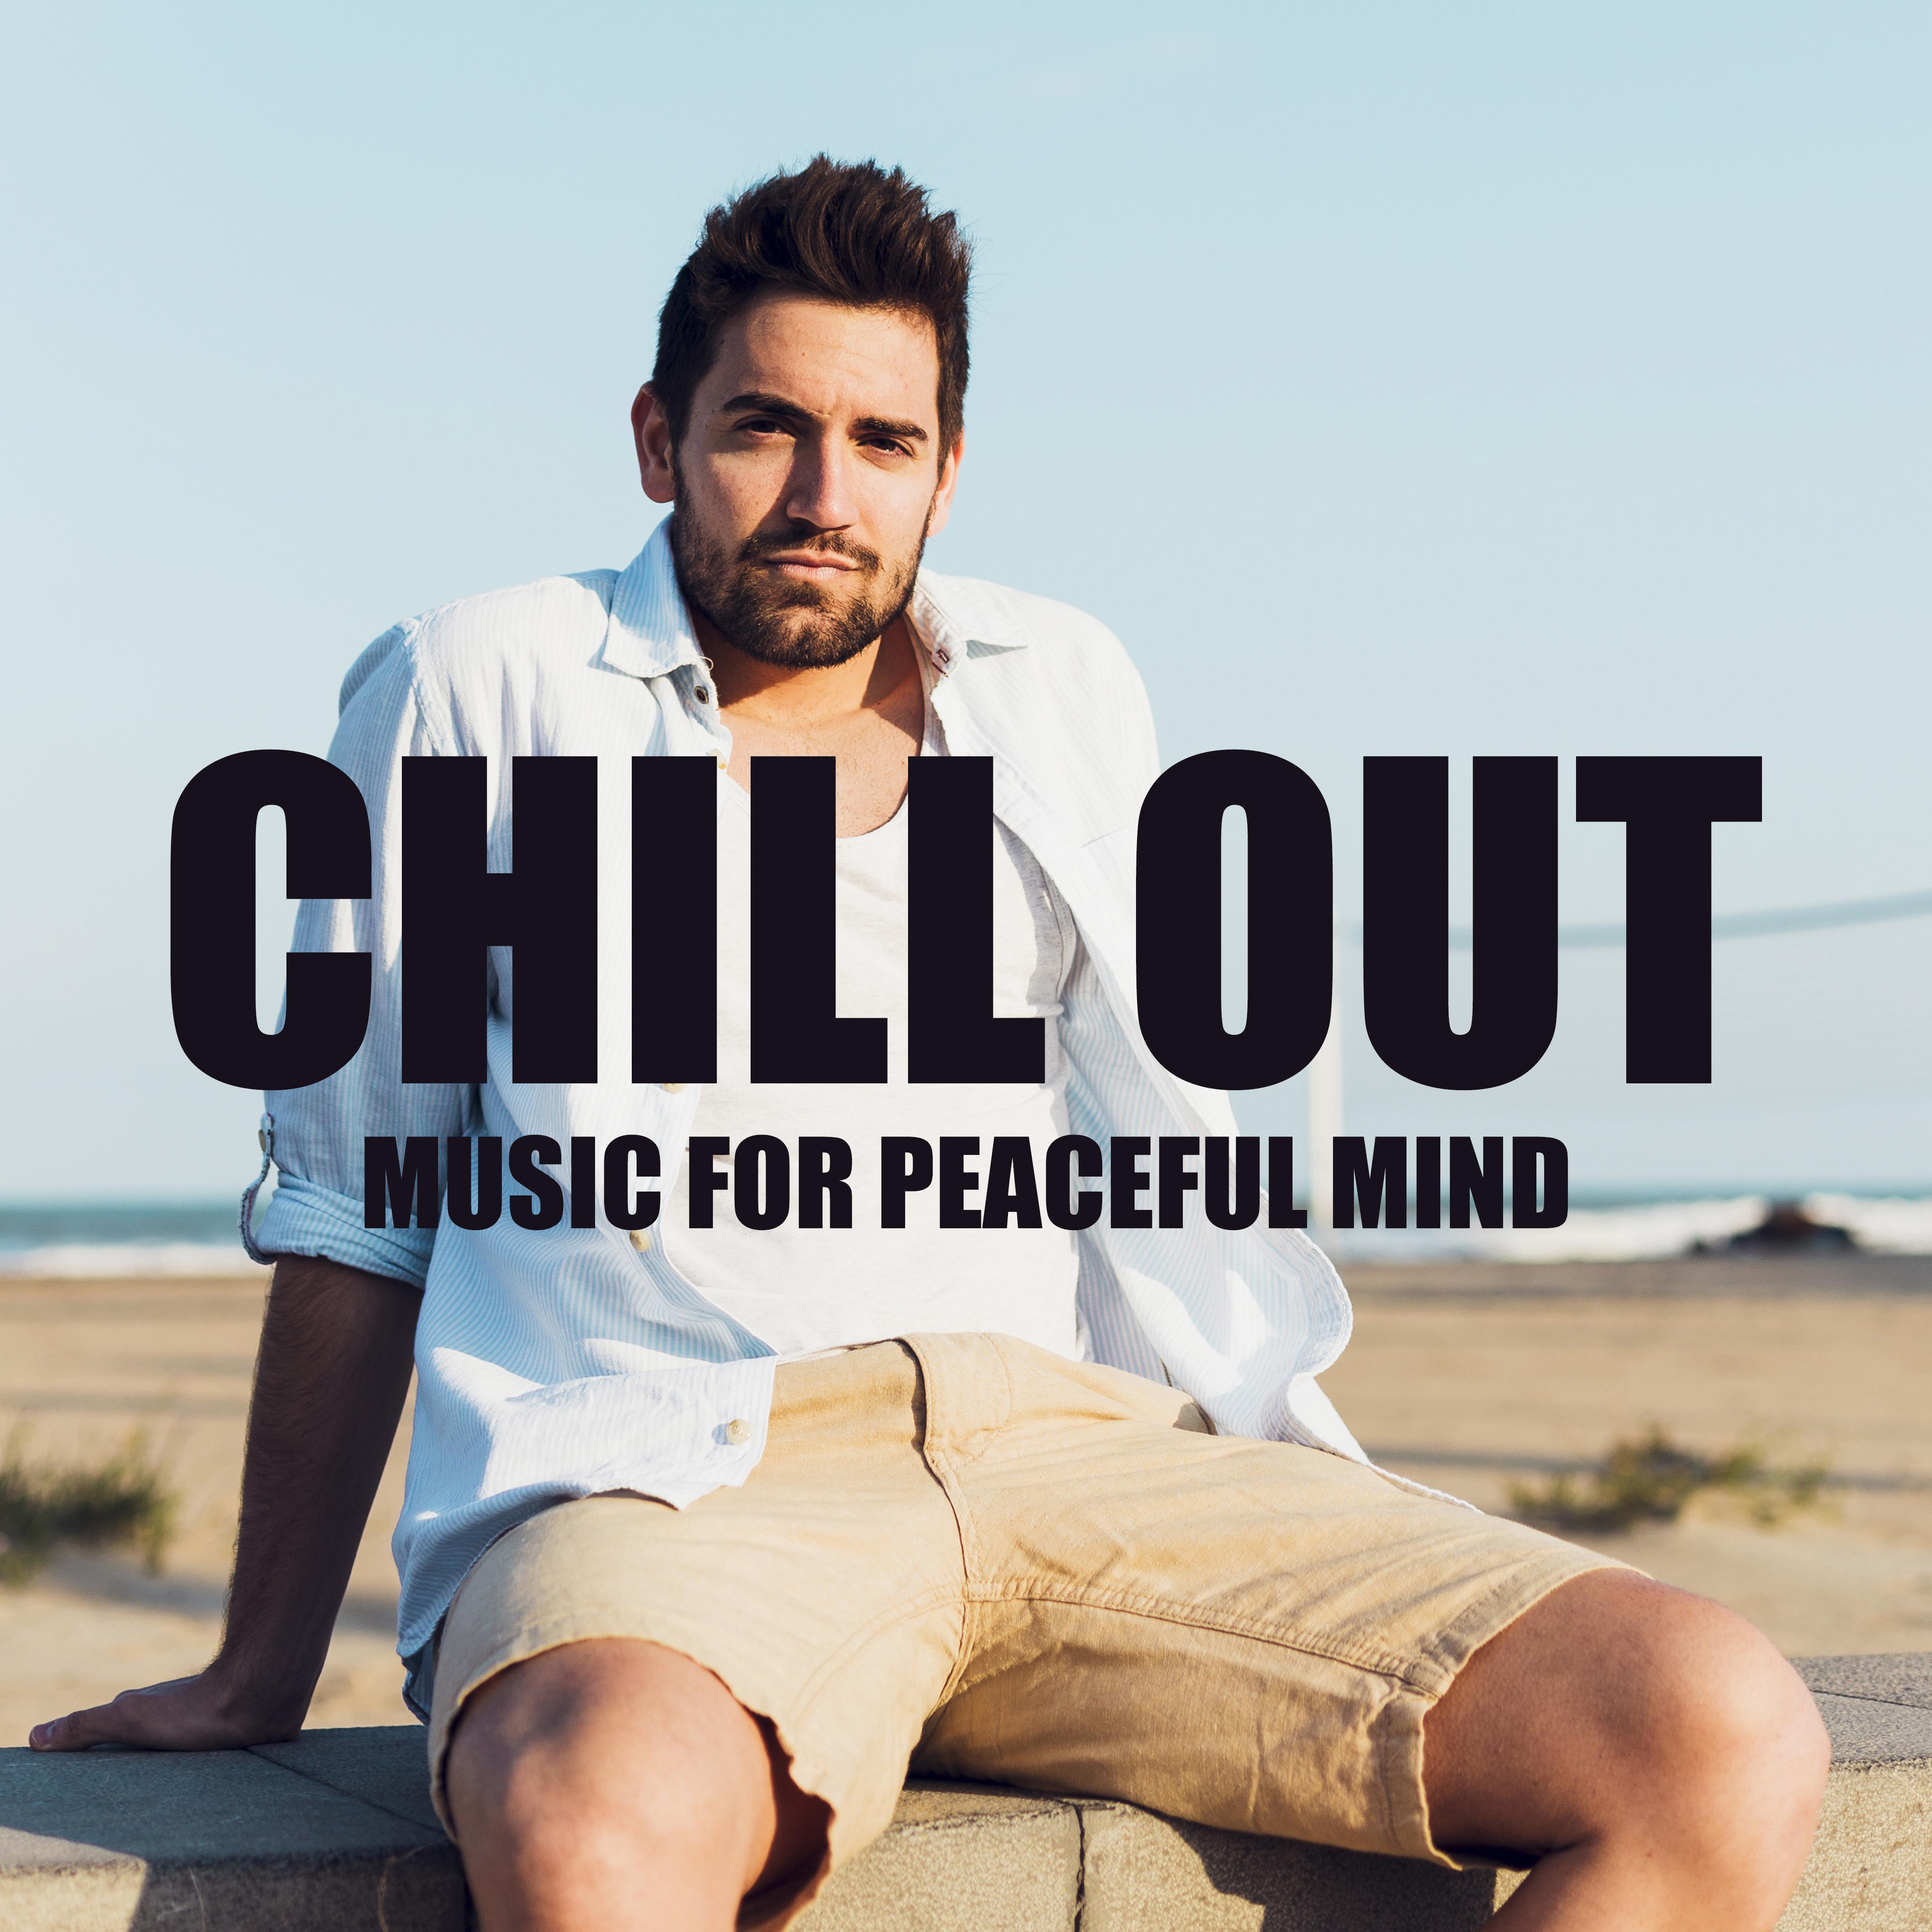 Chill Out Music for Peaceful Mind